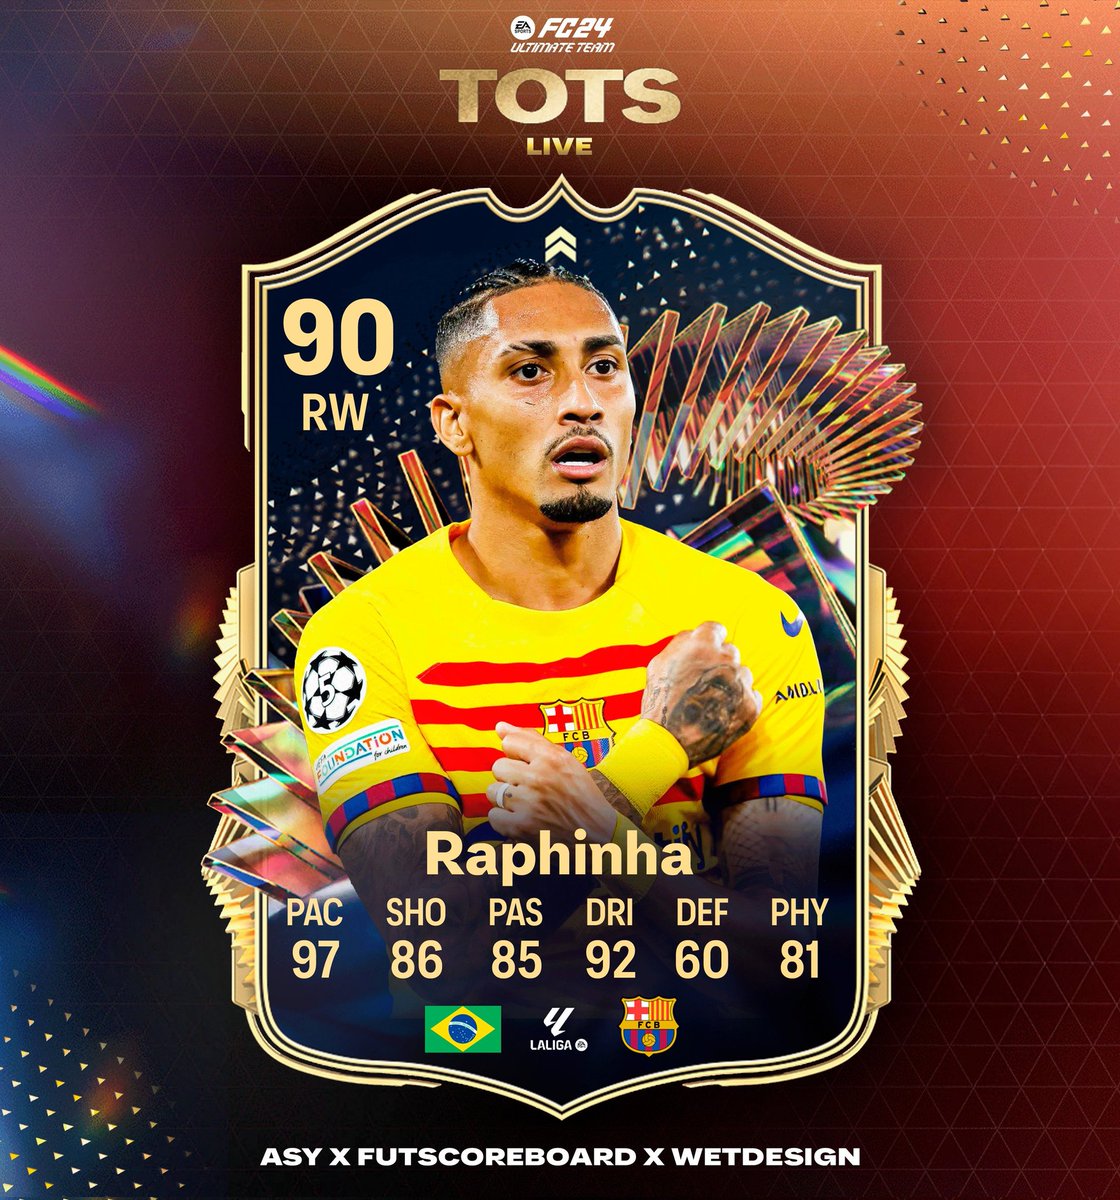 🚨 RAPHINHA 🇧🇷 IS ADDED TO COME AS A TOTS LIVE PLAYER 🔥

Classico on the way, counting already for upgrades!

Source @AsyFutTrader, @Fut_scoreboard & @WetDesignFUT